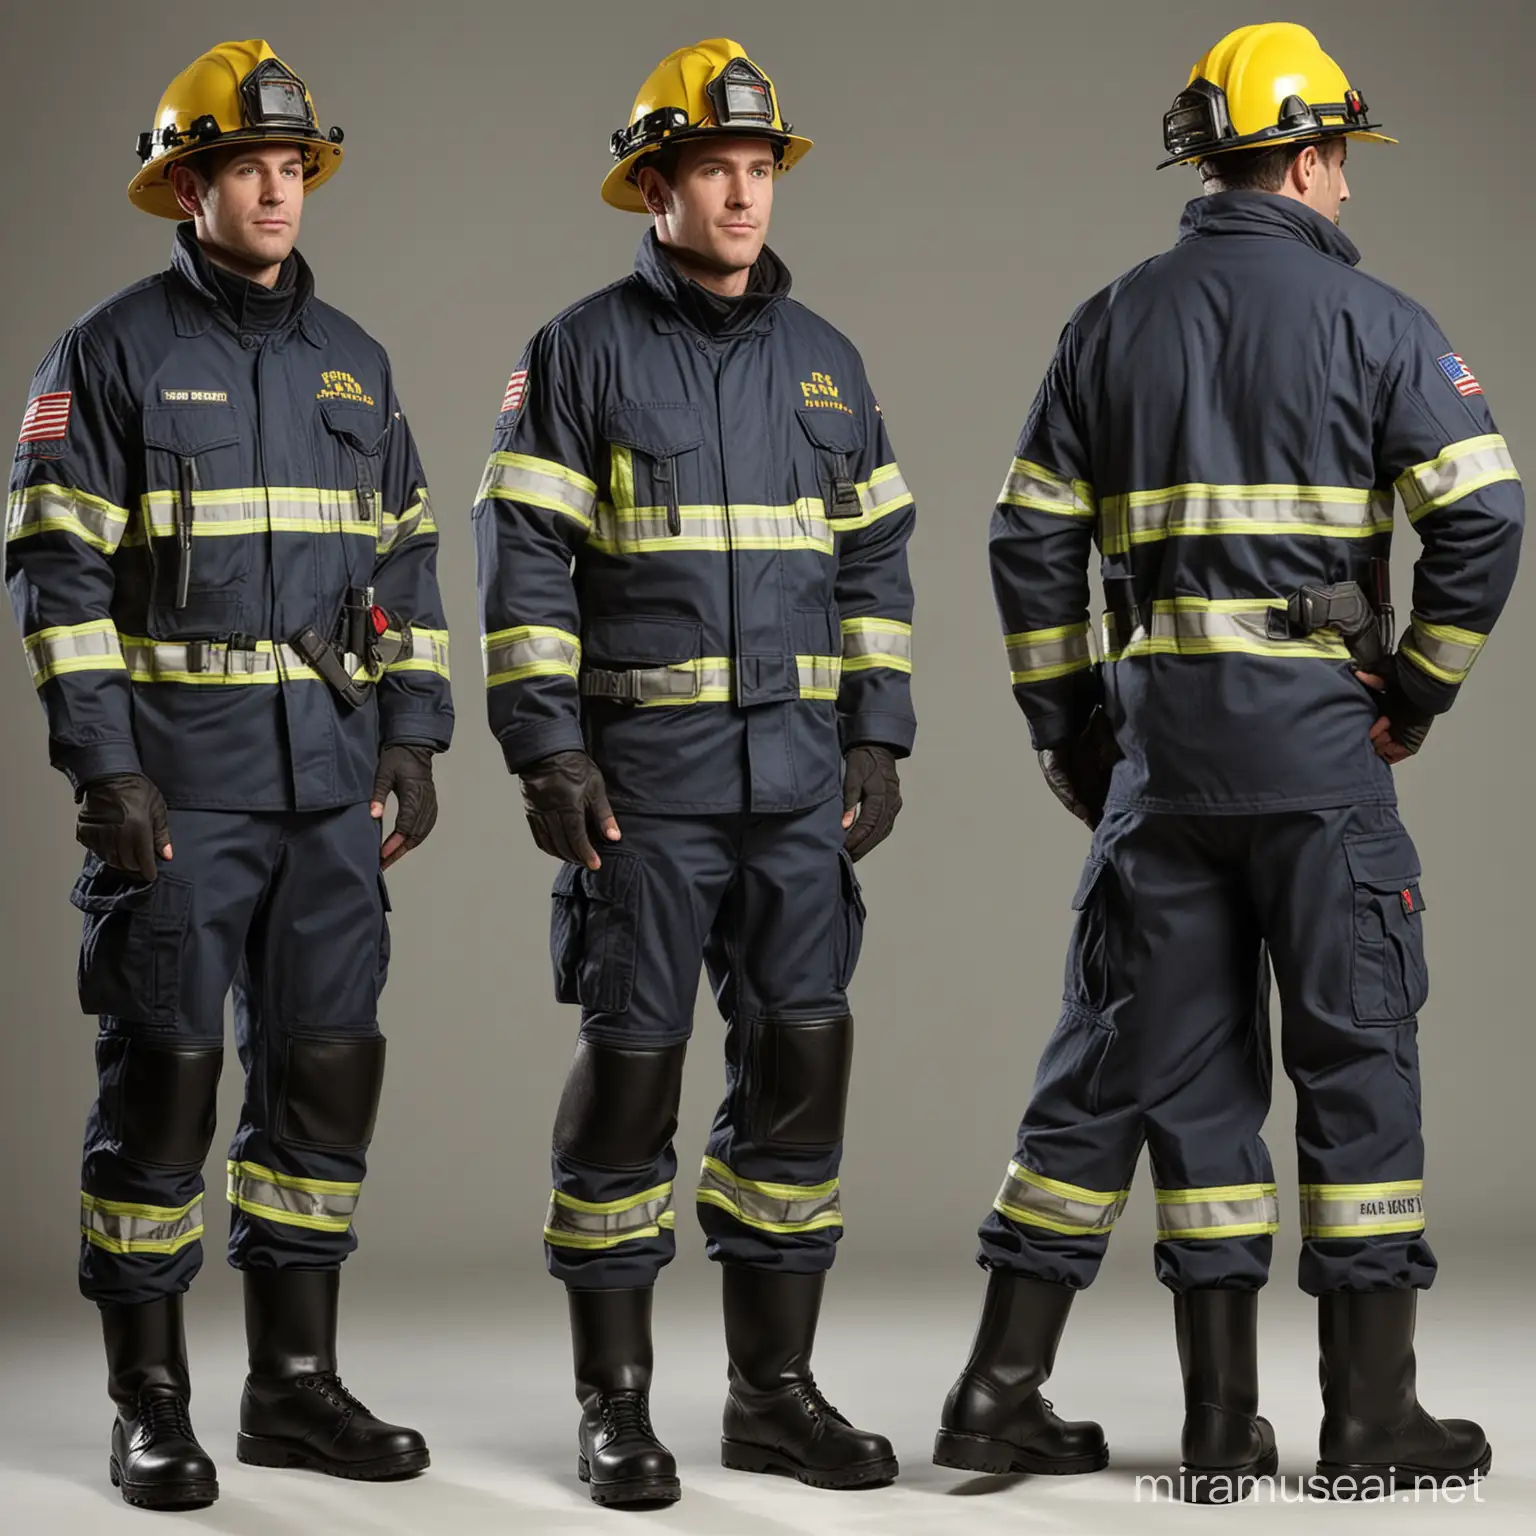 Certainly! Here's a prompt for generating images of work uniforms for firemen:

**Prompt:**
"Generate realistic and visually appealing images of work uniforms for firemen. The uniforms should convey safety, durability, and professionalism. Ensure that the uniforms are suitable for various firefighting scenarios, including structural fires, rescue operations, and hazardous material incidents. Incorporate recognizable elements such as reflective stripes, fire-resistant materials, and protective gear like helmets and boots. The uniforms should be modern yet functional, providing both comfort and mobility to the wearer. Pay attention to details such as fabric textures, insignias, and color schemes that signify authority and readiness. Aim for a diverse range of images showcasing different angles, environments, and activities typical of firefighting duties."